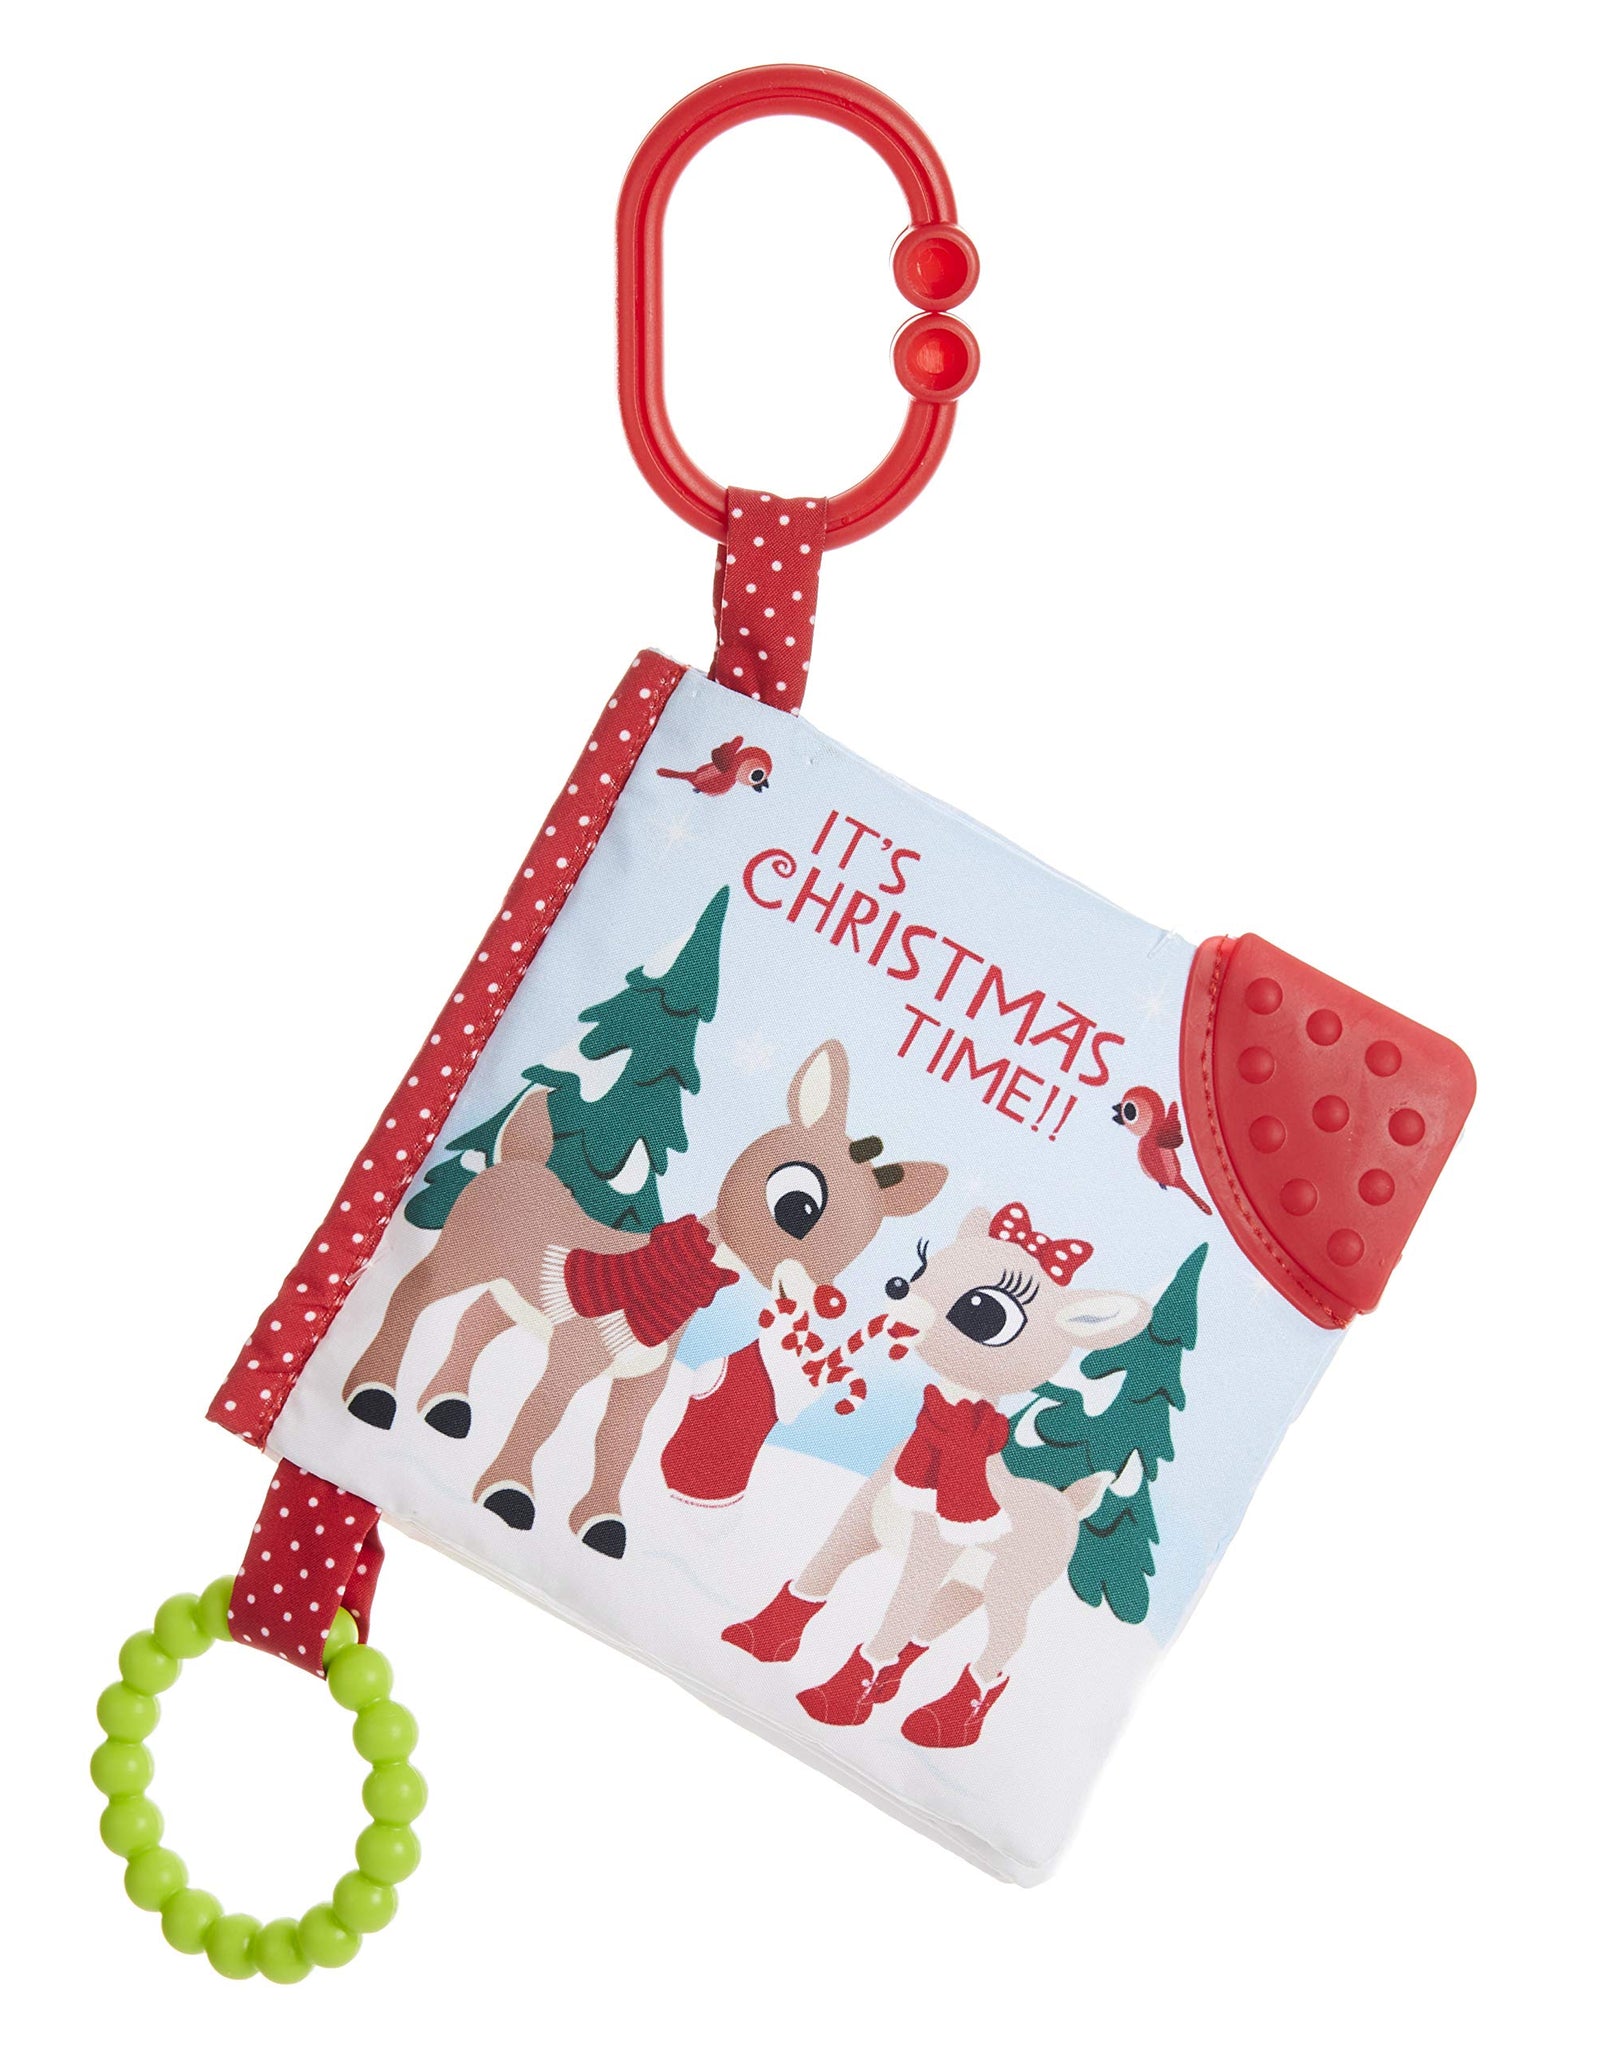 KIDS PREFERRED Rudolph The Red-Nosed Reindeer On The Go Soft Teether Book